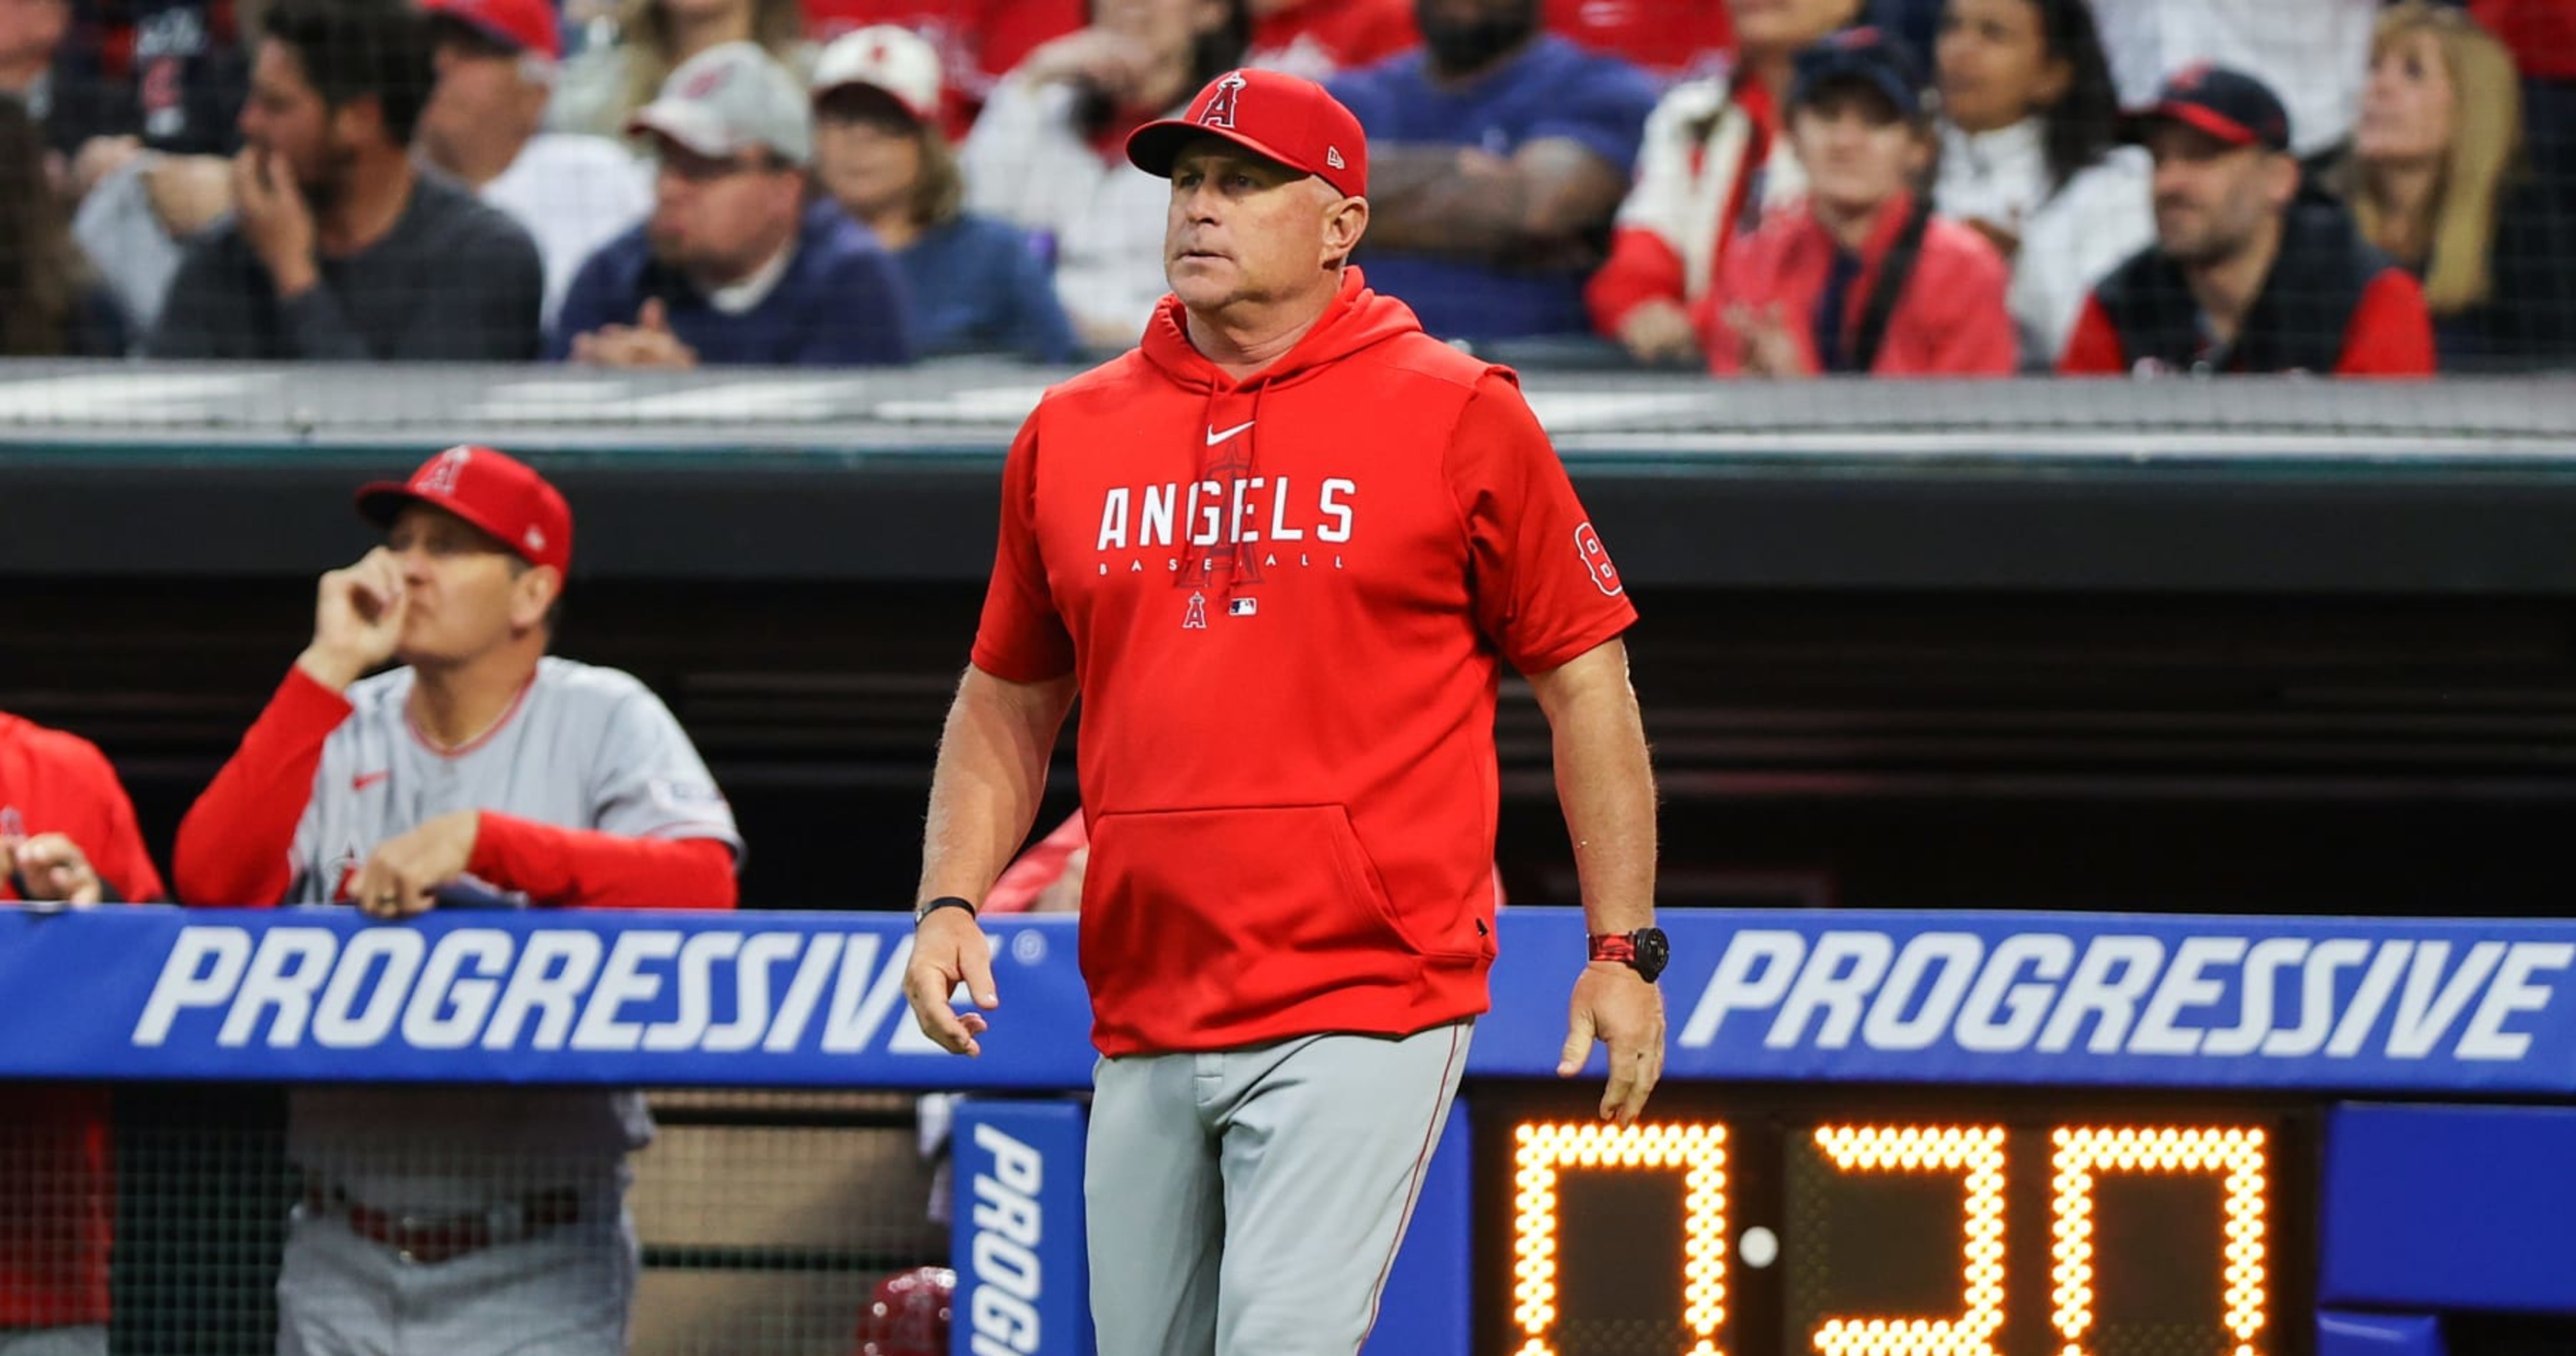 MLB Hot Seat: 3 managers who could earn contract extensions if